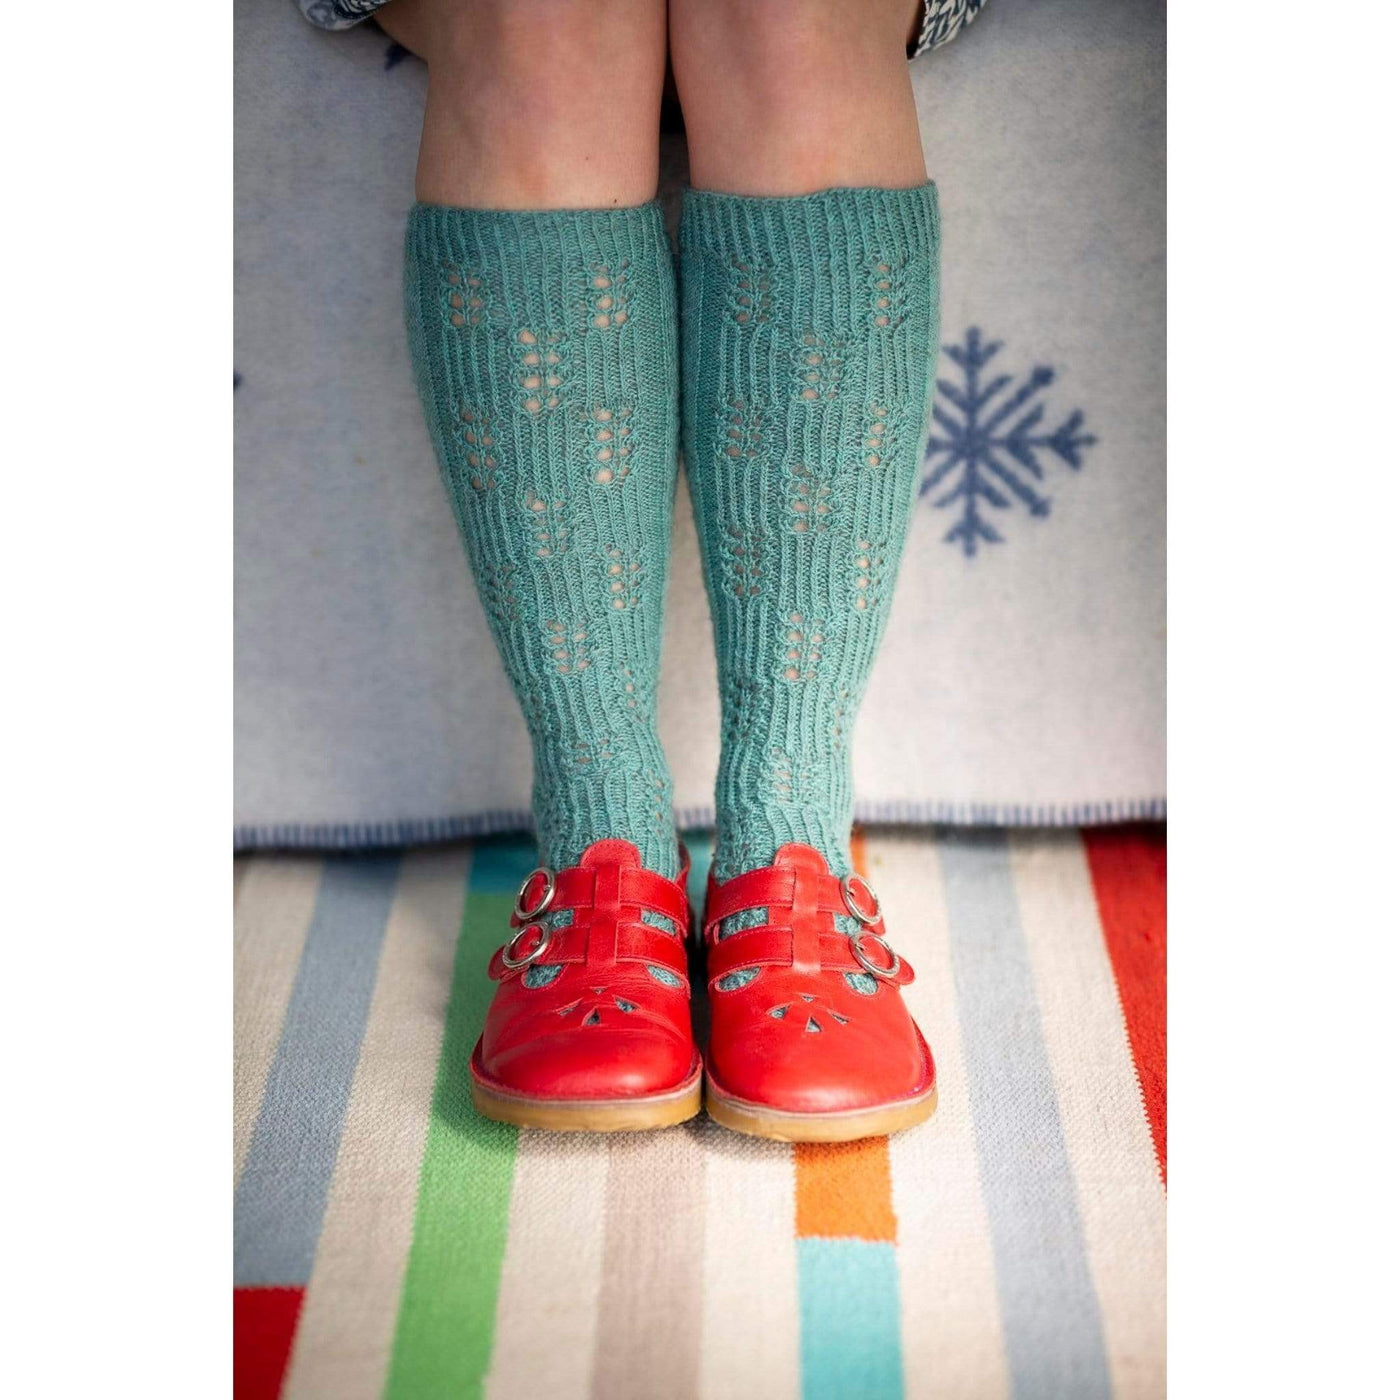 The Woolly Thistle Bluestockings by Kate Davies & Nicole Pohl featuring girl wearing teal knitted socks and red shoes